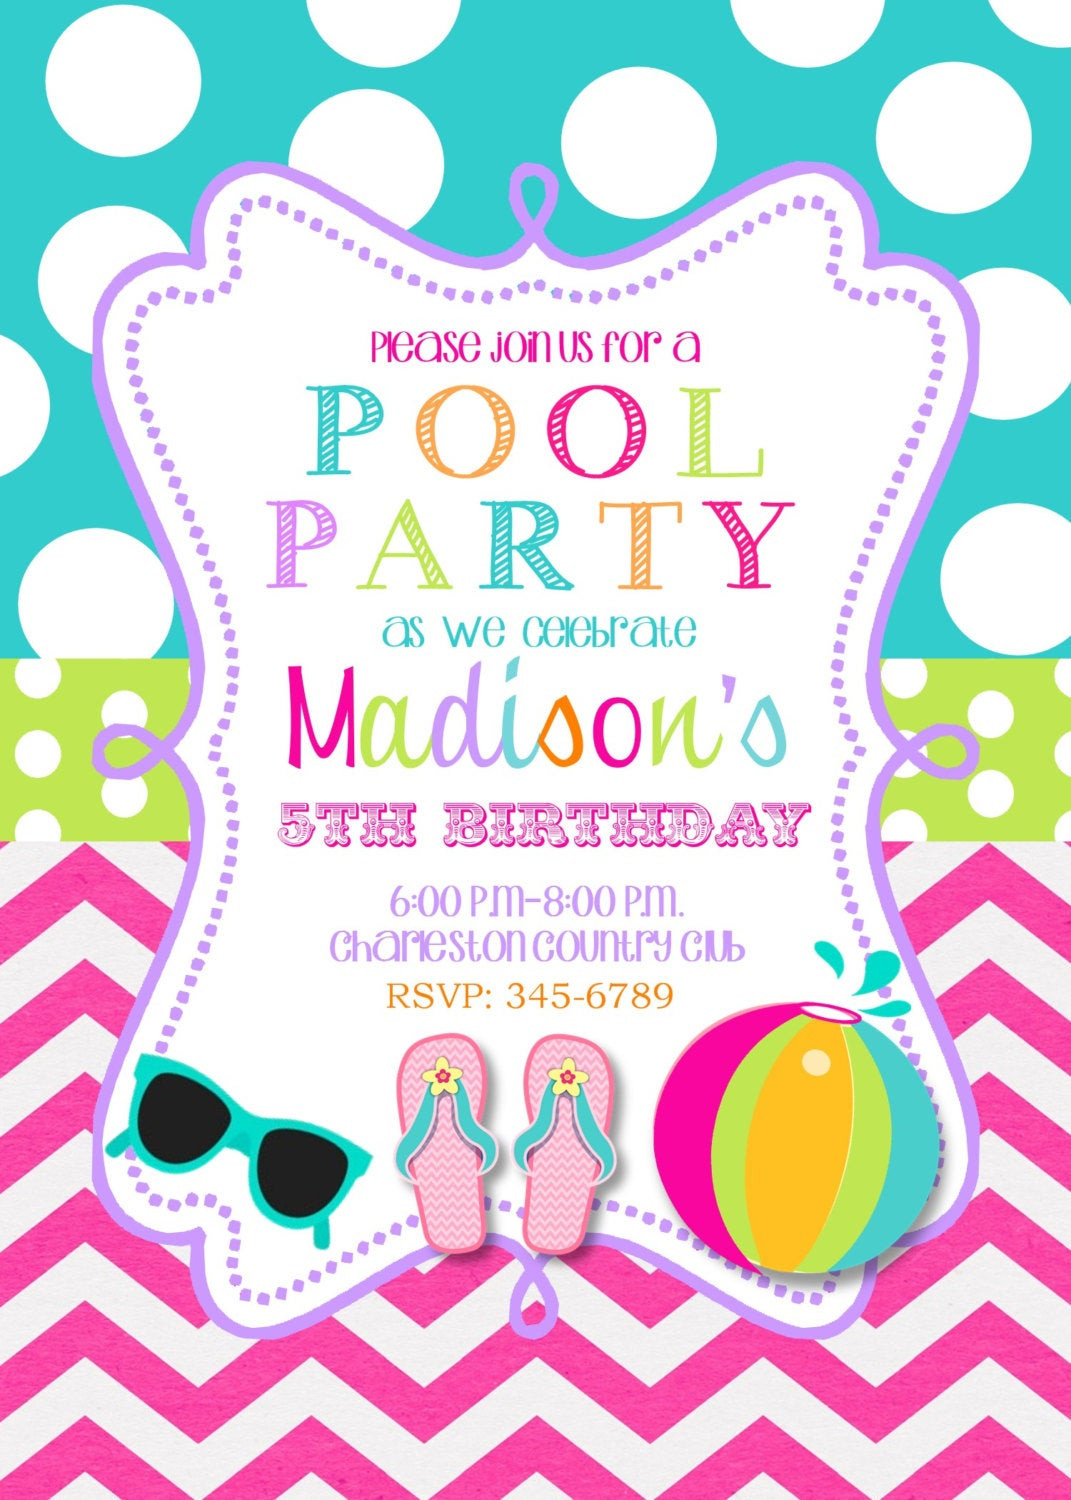 Pool Party Birthday Invitations
 Pool Party Birthday Party invitations printable or digital